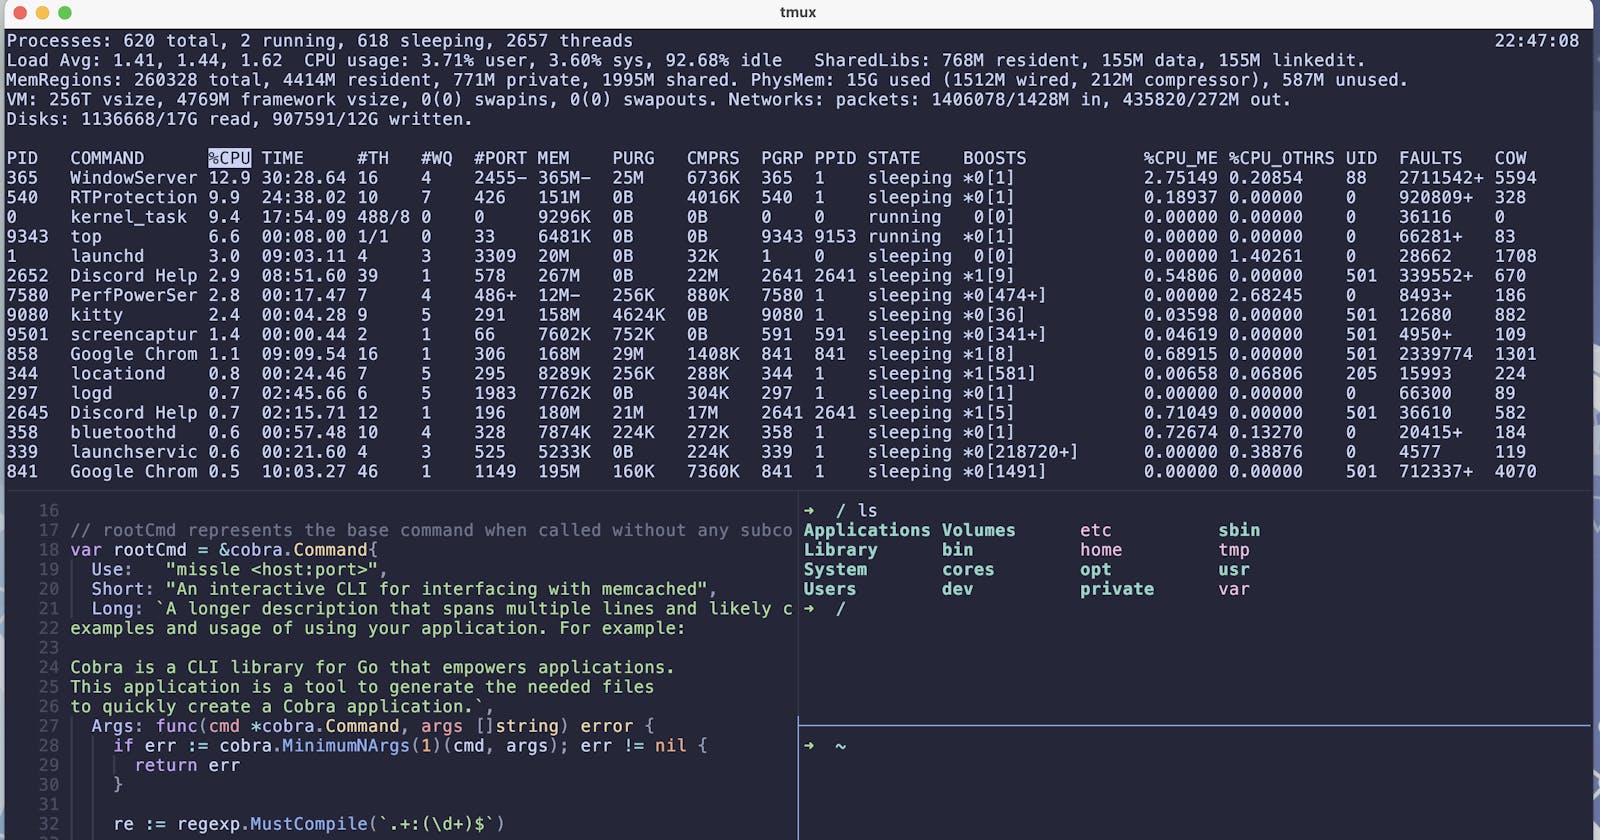 Getting started with tmux